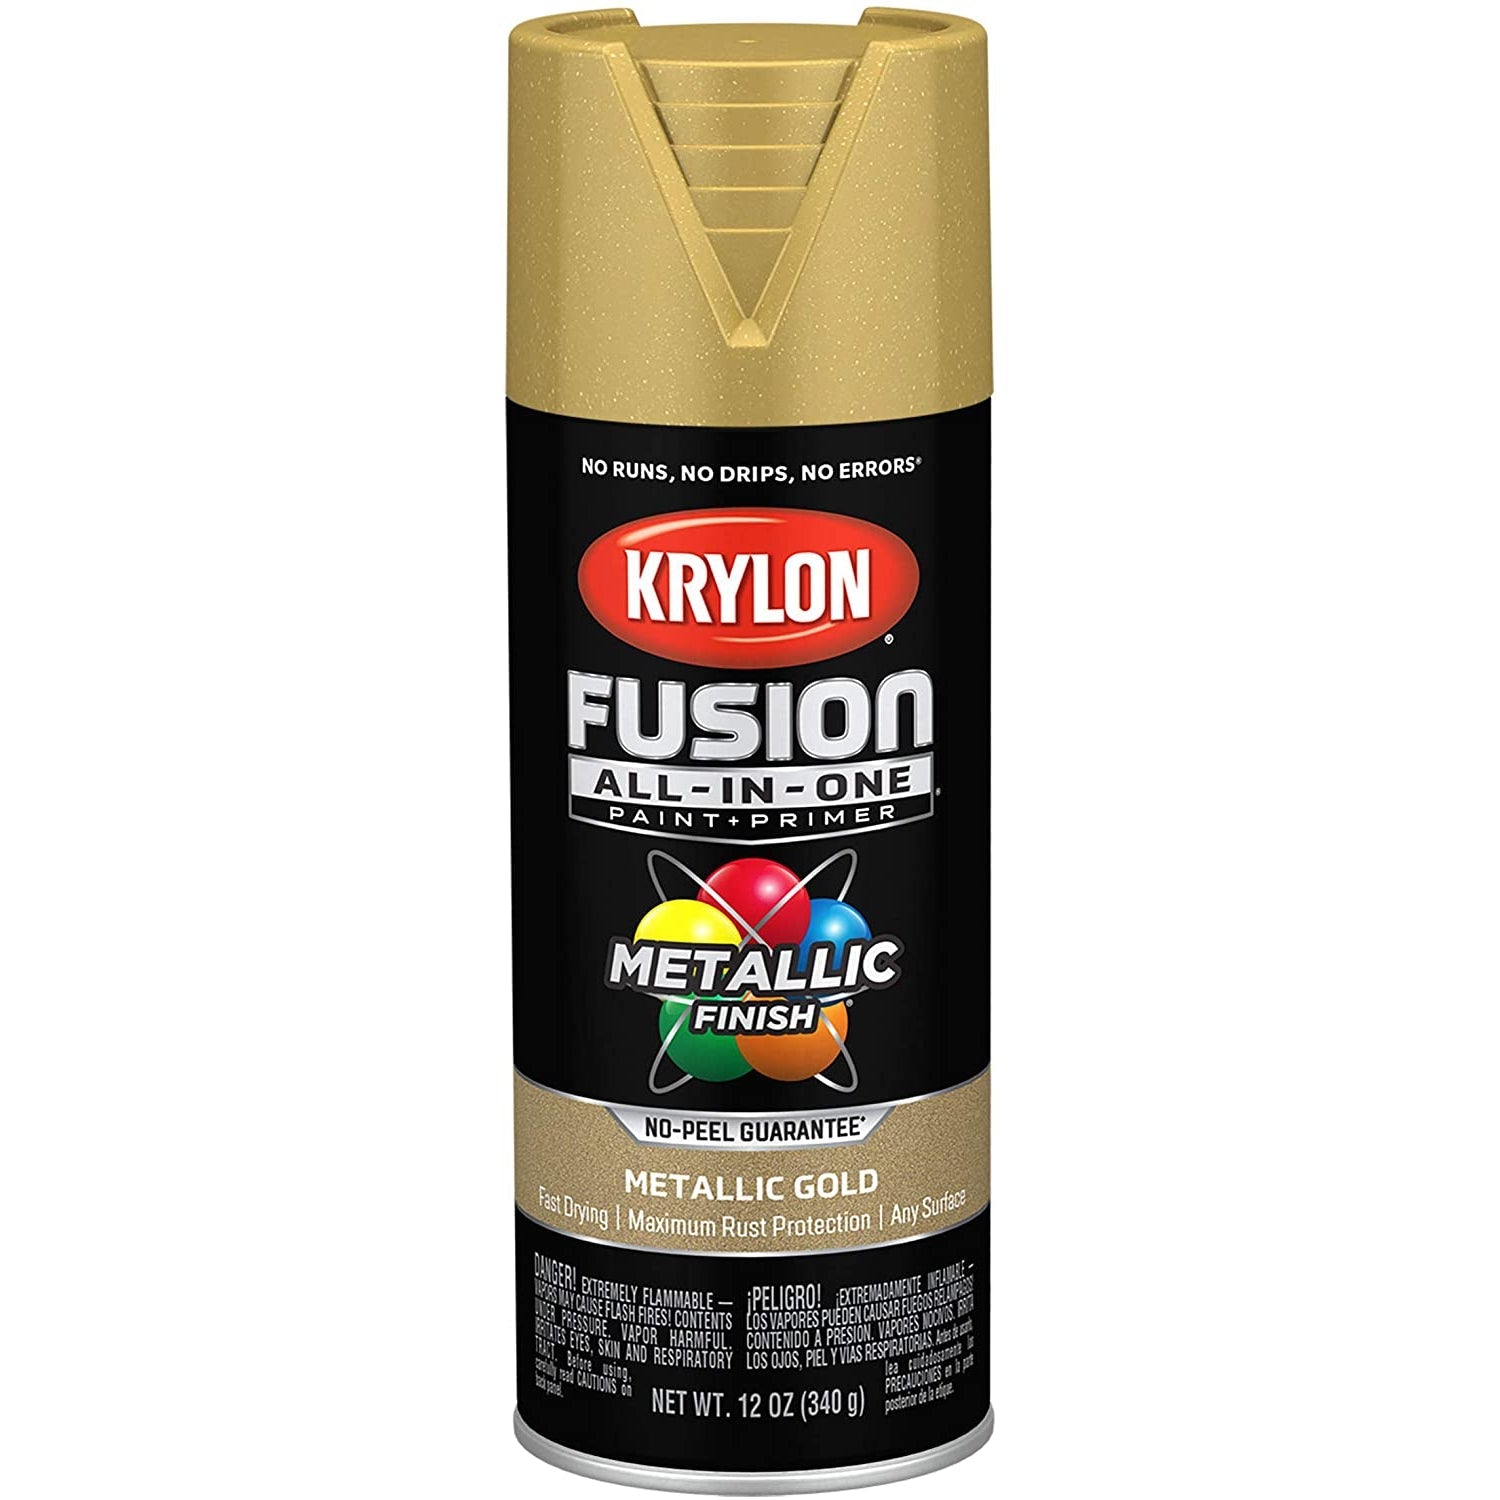 Krylon Fusion All-In-One Spray Paint for Indoor/Outdoor Use, 340g